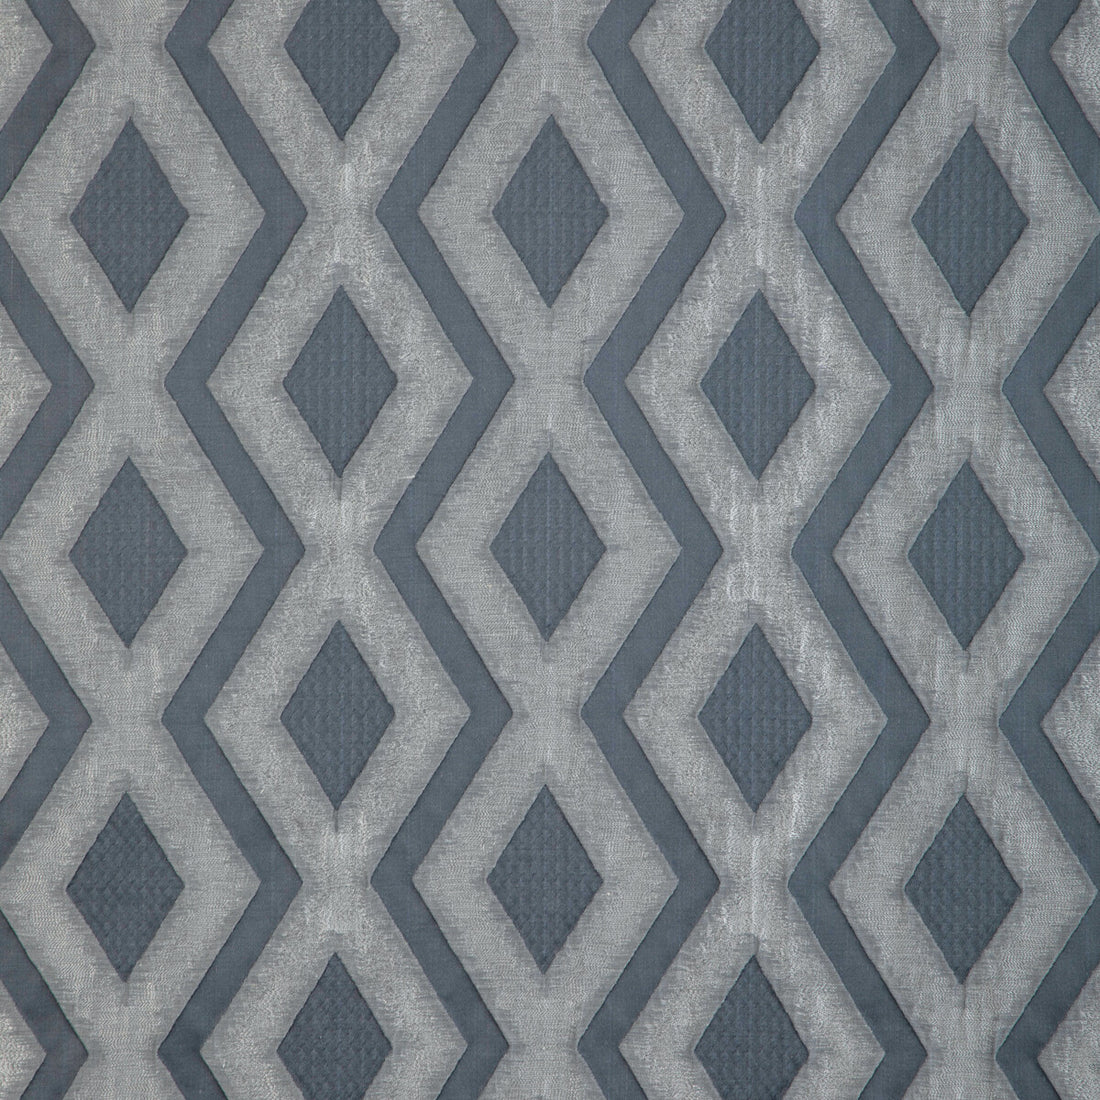 Flawless fabric in sea side color - pattern 36839.52.0 - by Kravet Design in the Candice Olson collection